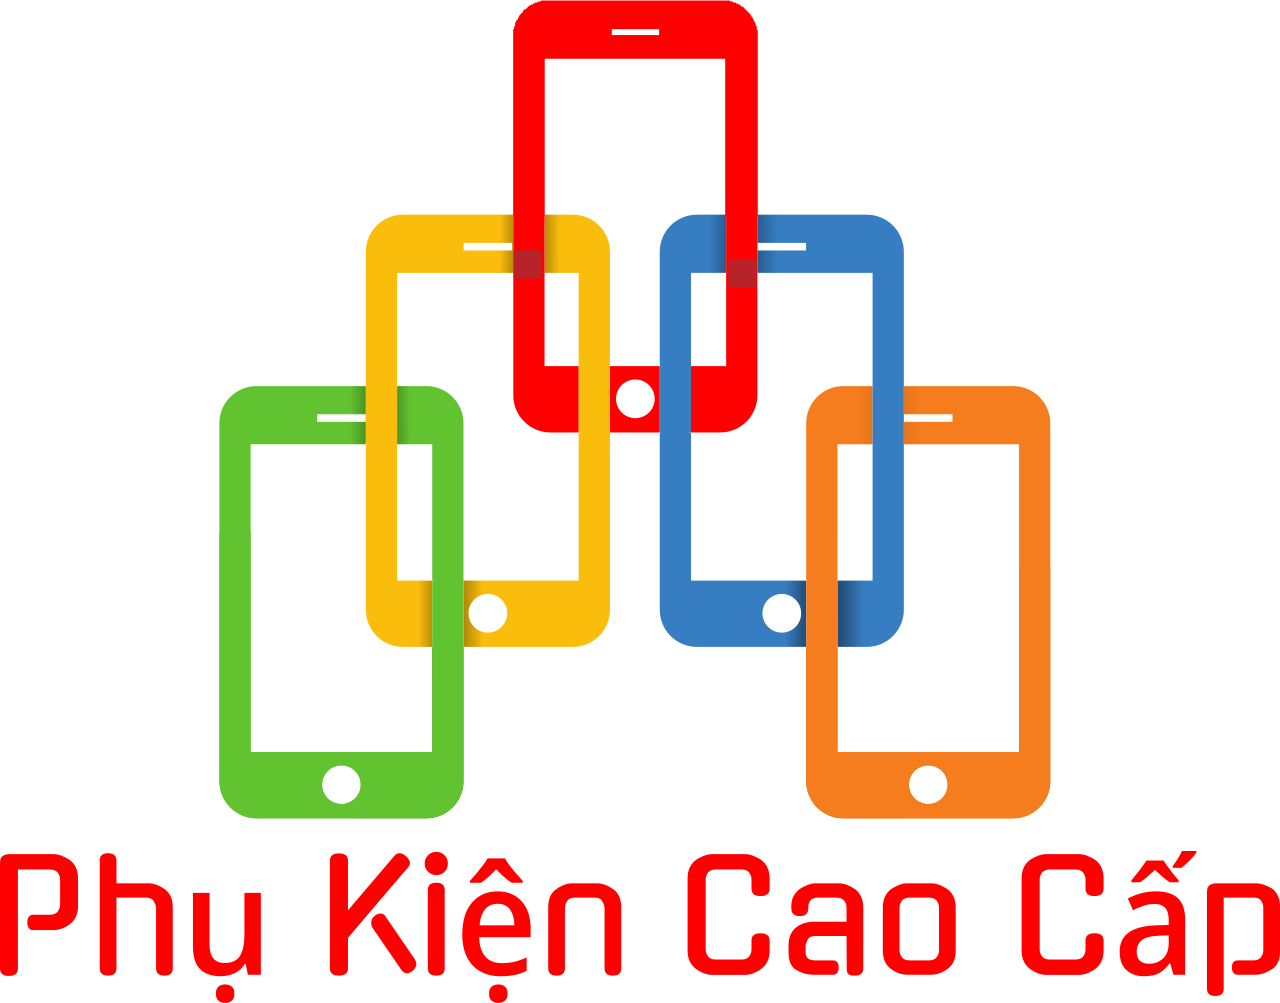 Phụ Kiện Cao Cấp's web page